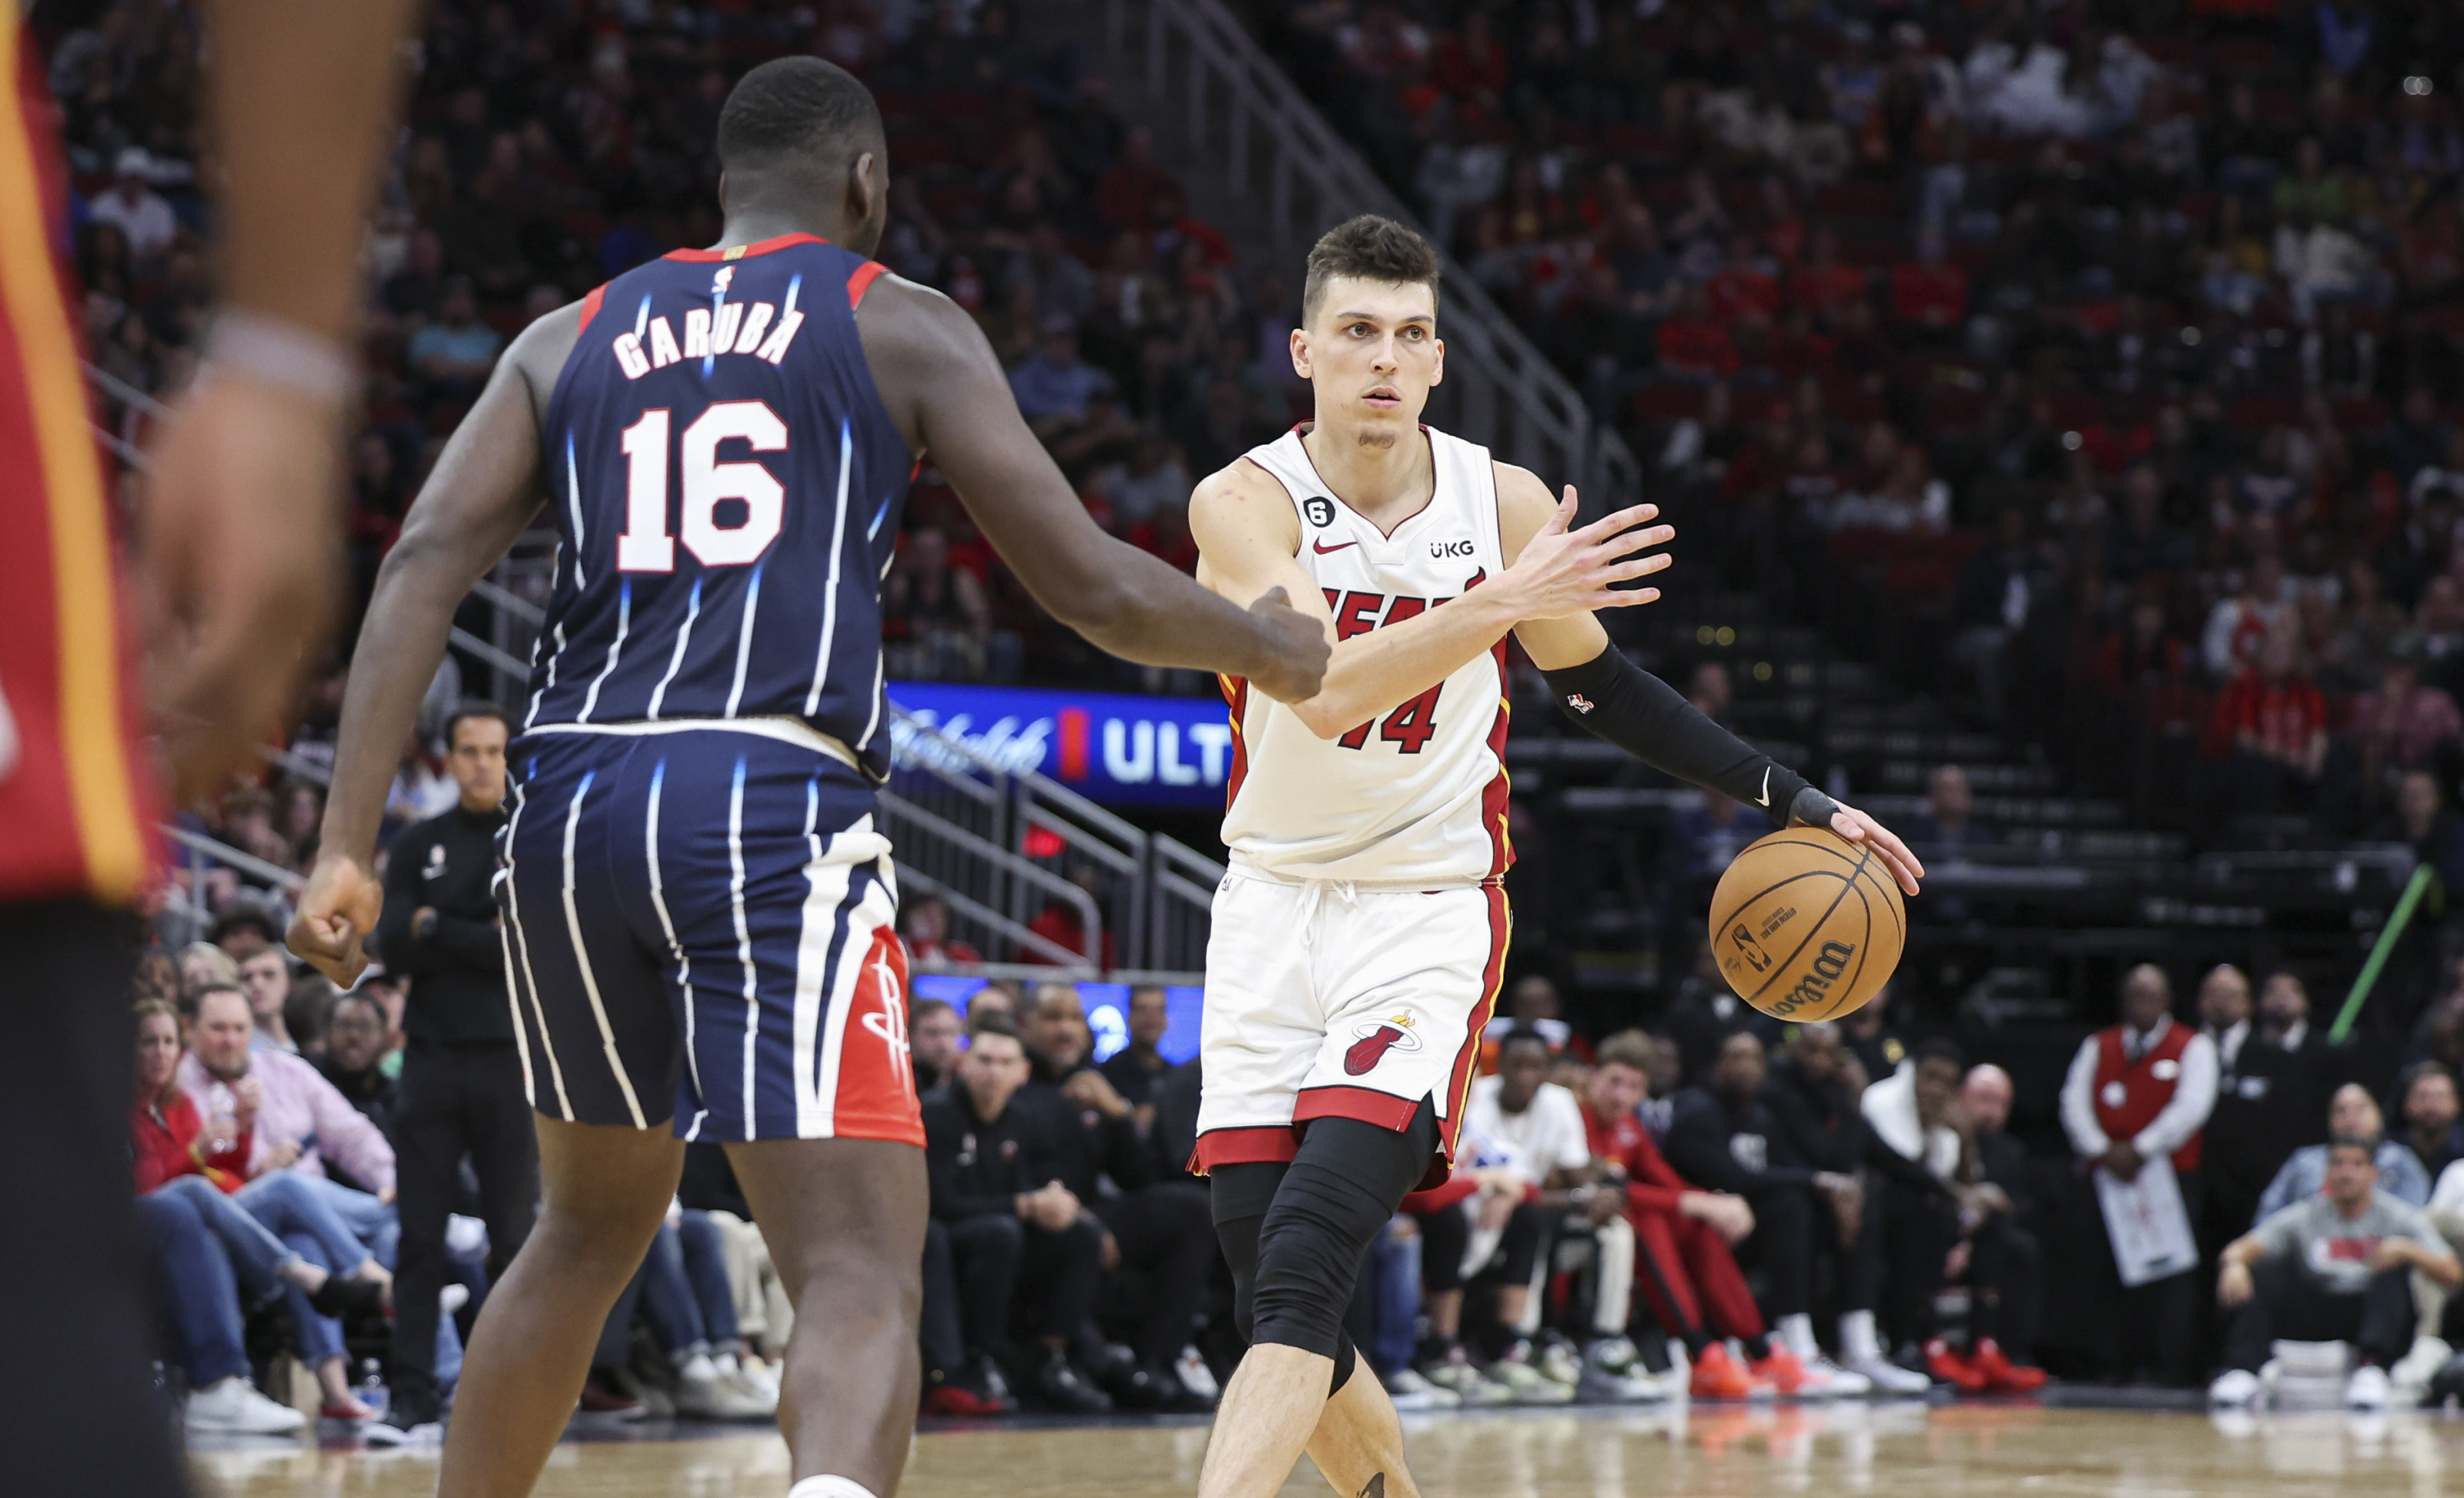 Tyler Herro: The Miami Heat's newest star is not afraid of the moment